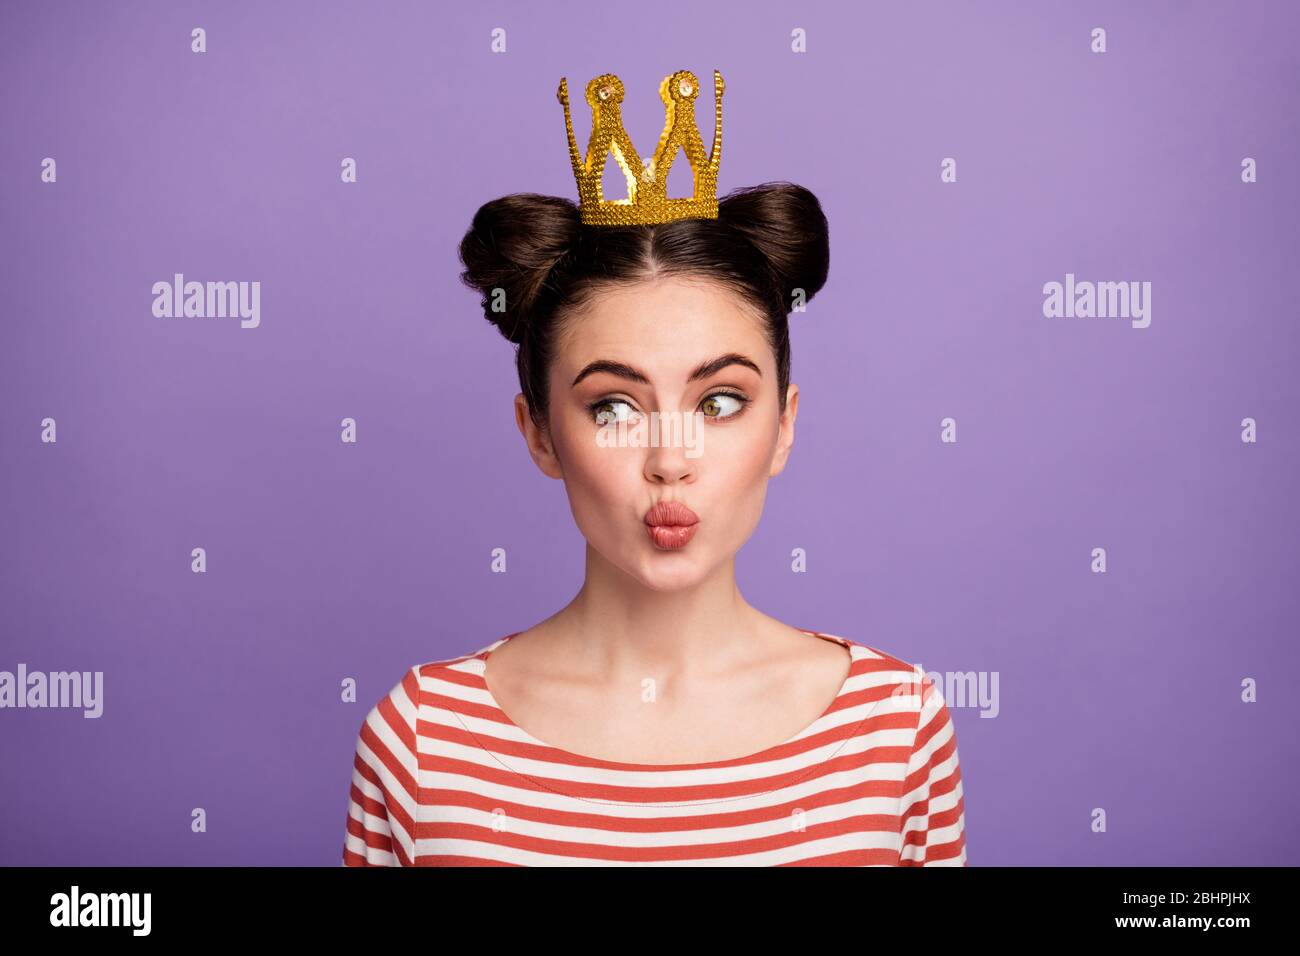 Closeup photo of pretty lady prom queen famous person sending air kisses king and citizens wear golden tiara white red casual striped shirt isolated Stock Photo